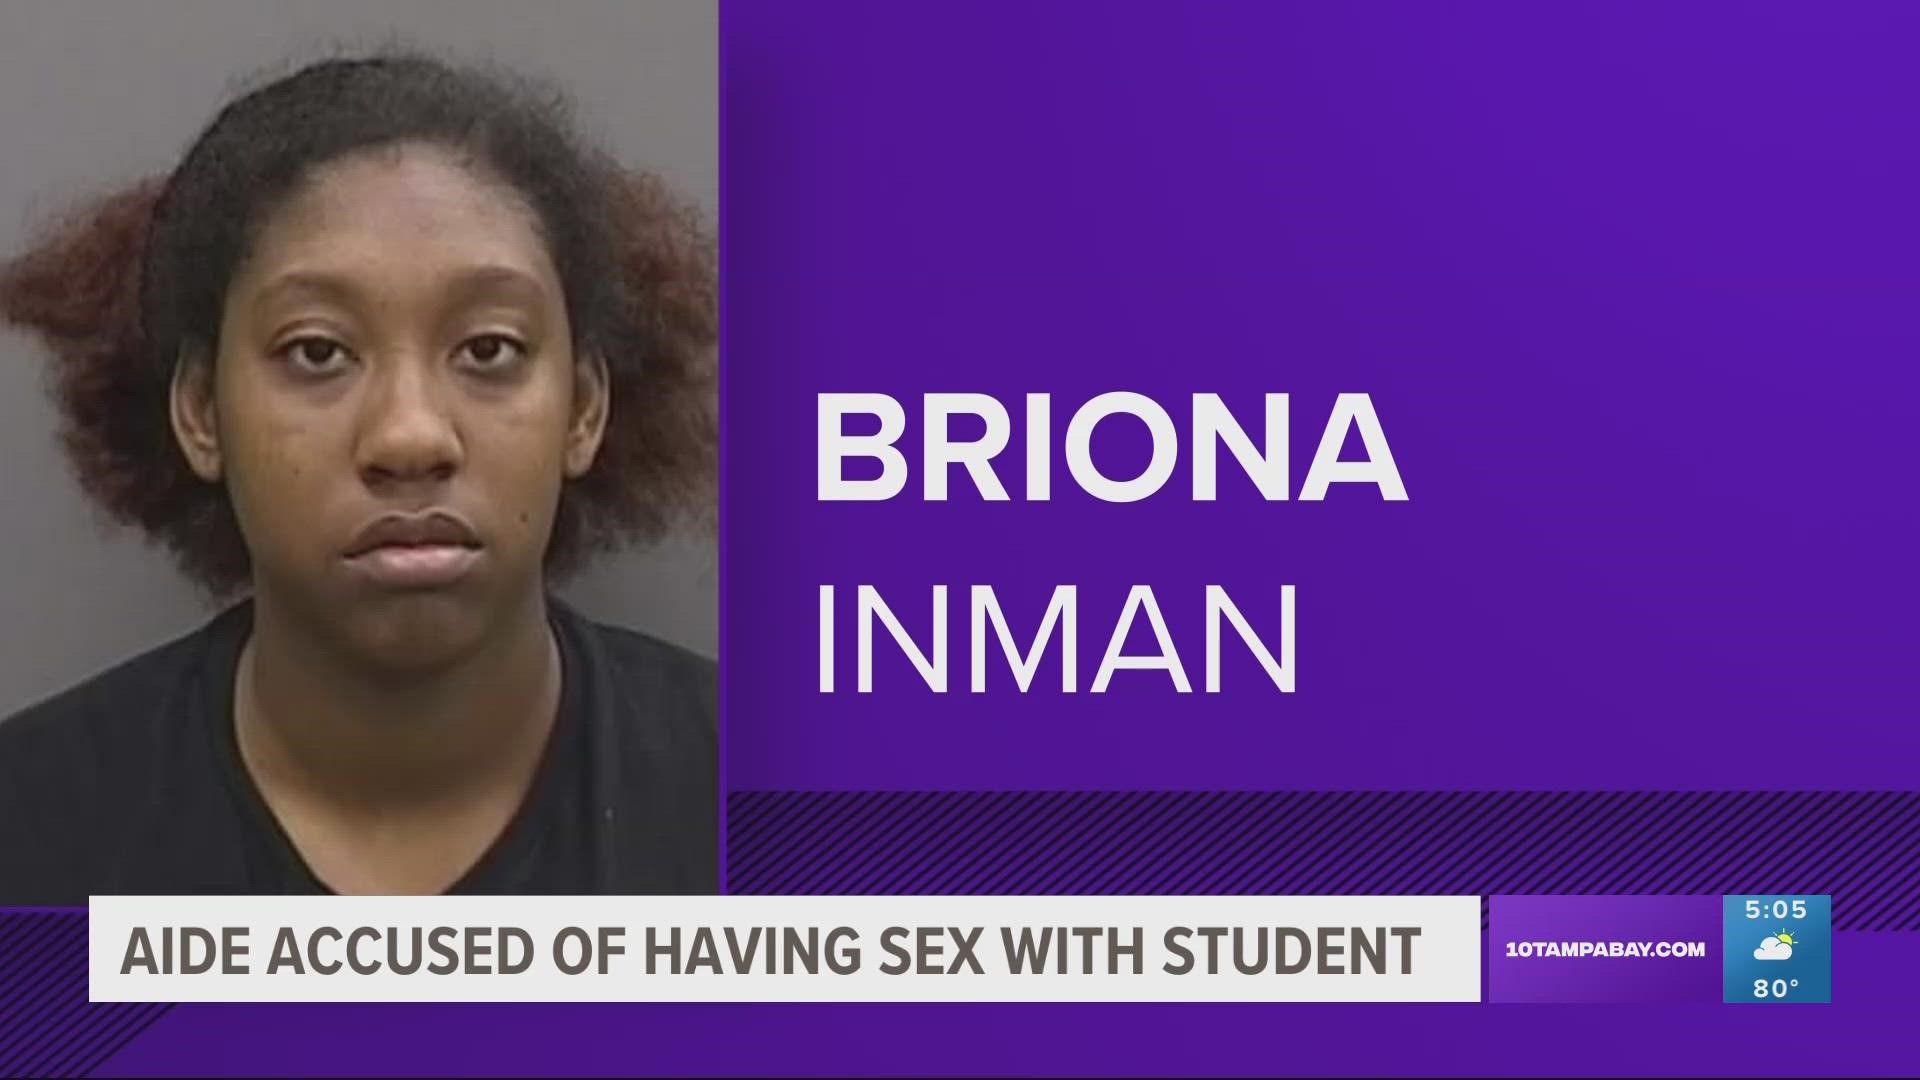 The 24-year-old is facing one charge for an authority figure soliciting or engaging in sexual conduct with a student.